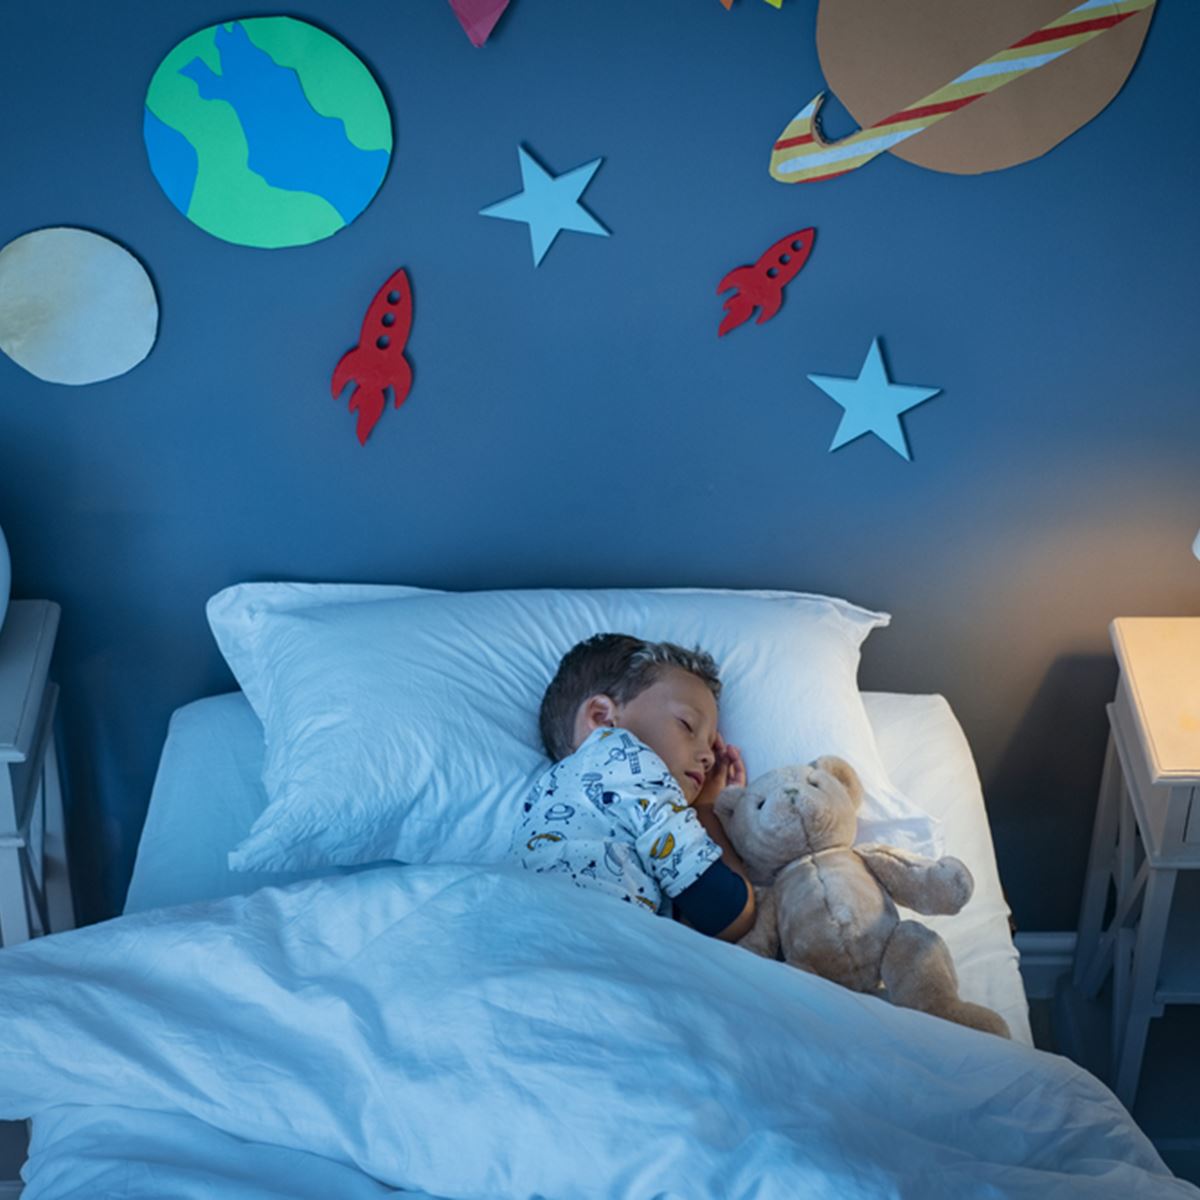 Children's bedrooms can be functional and expressive